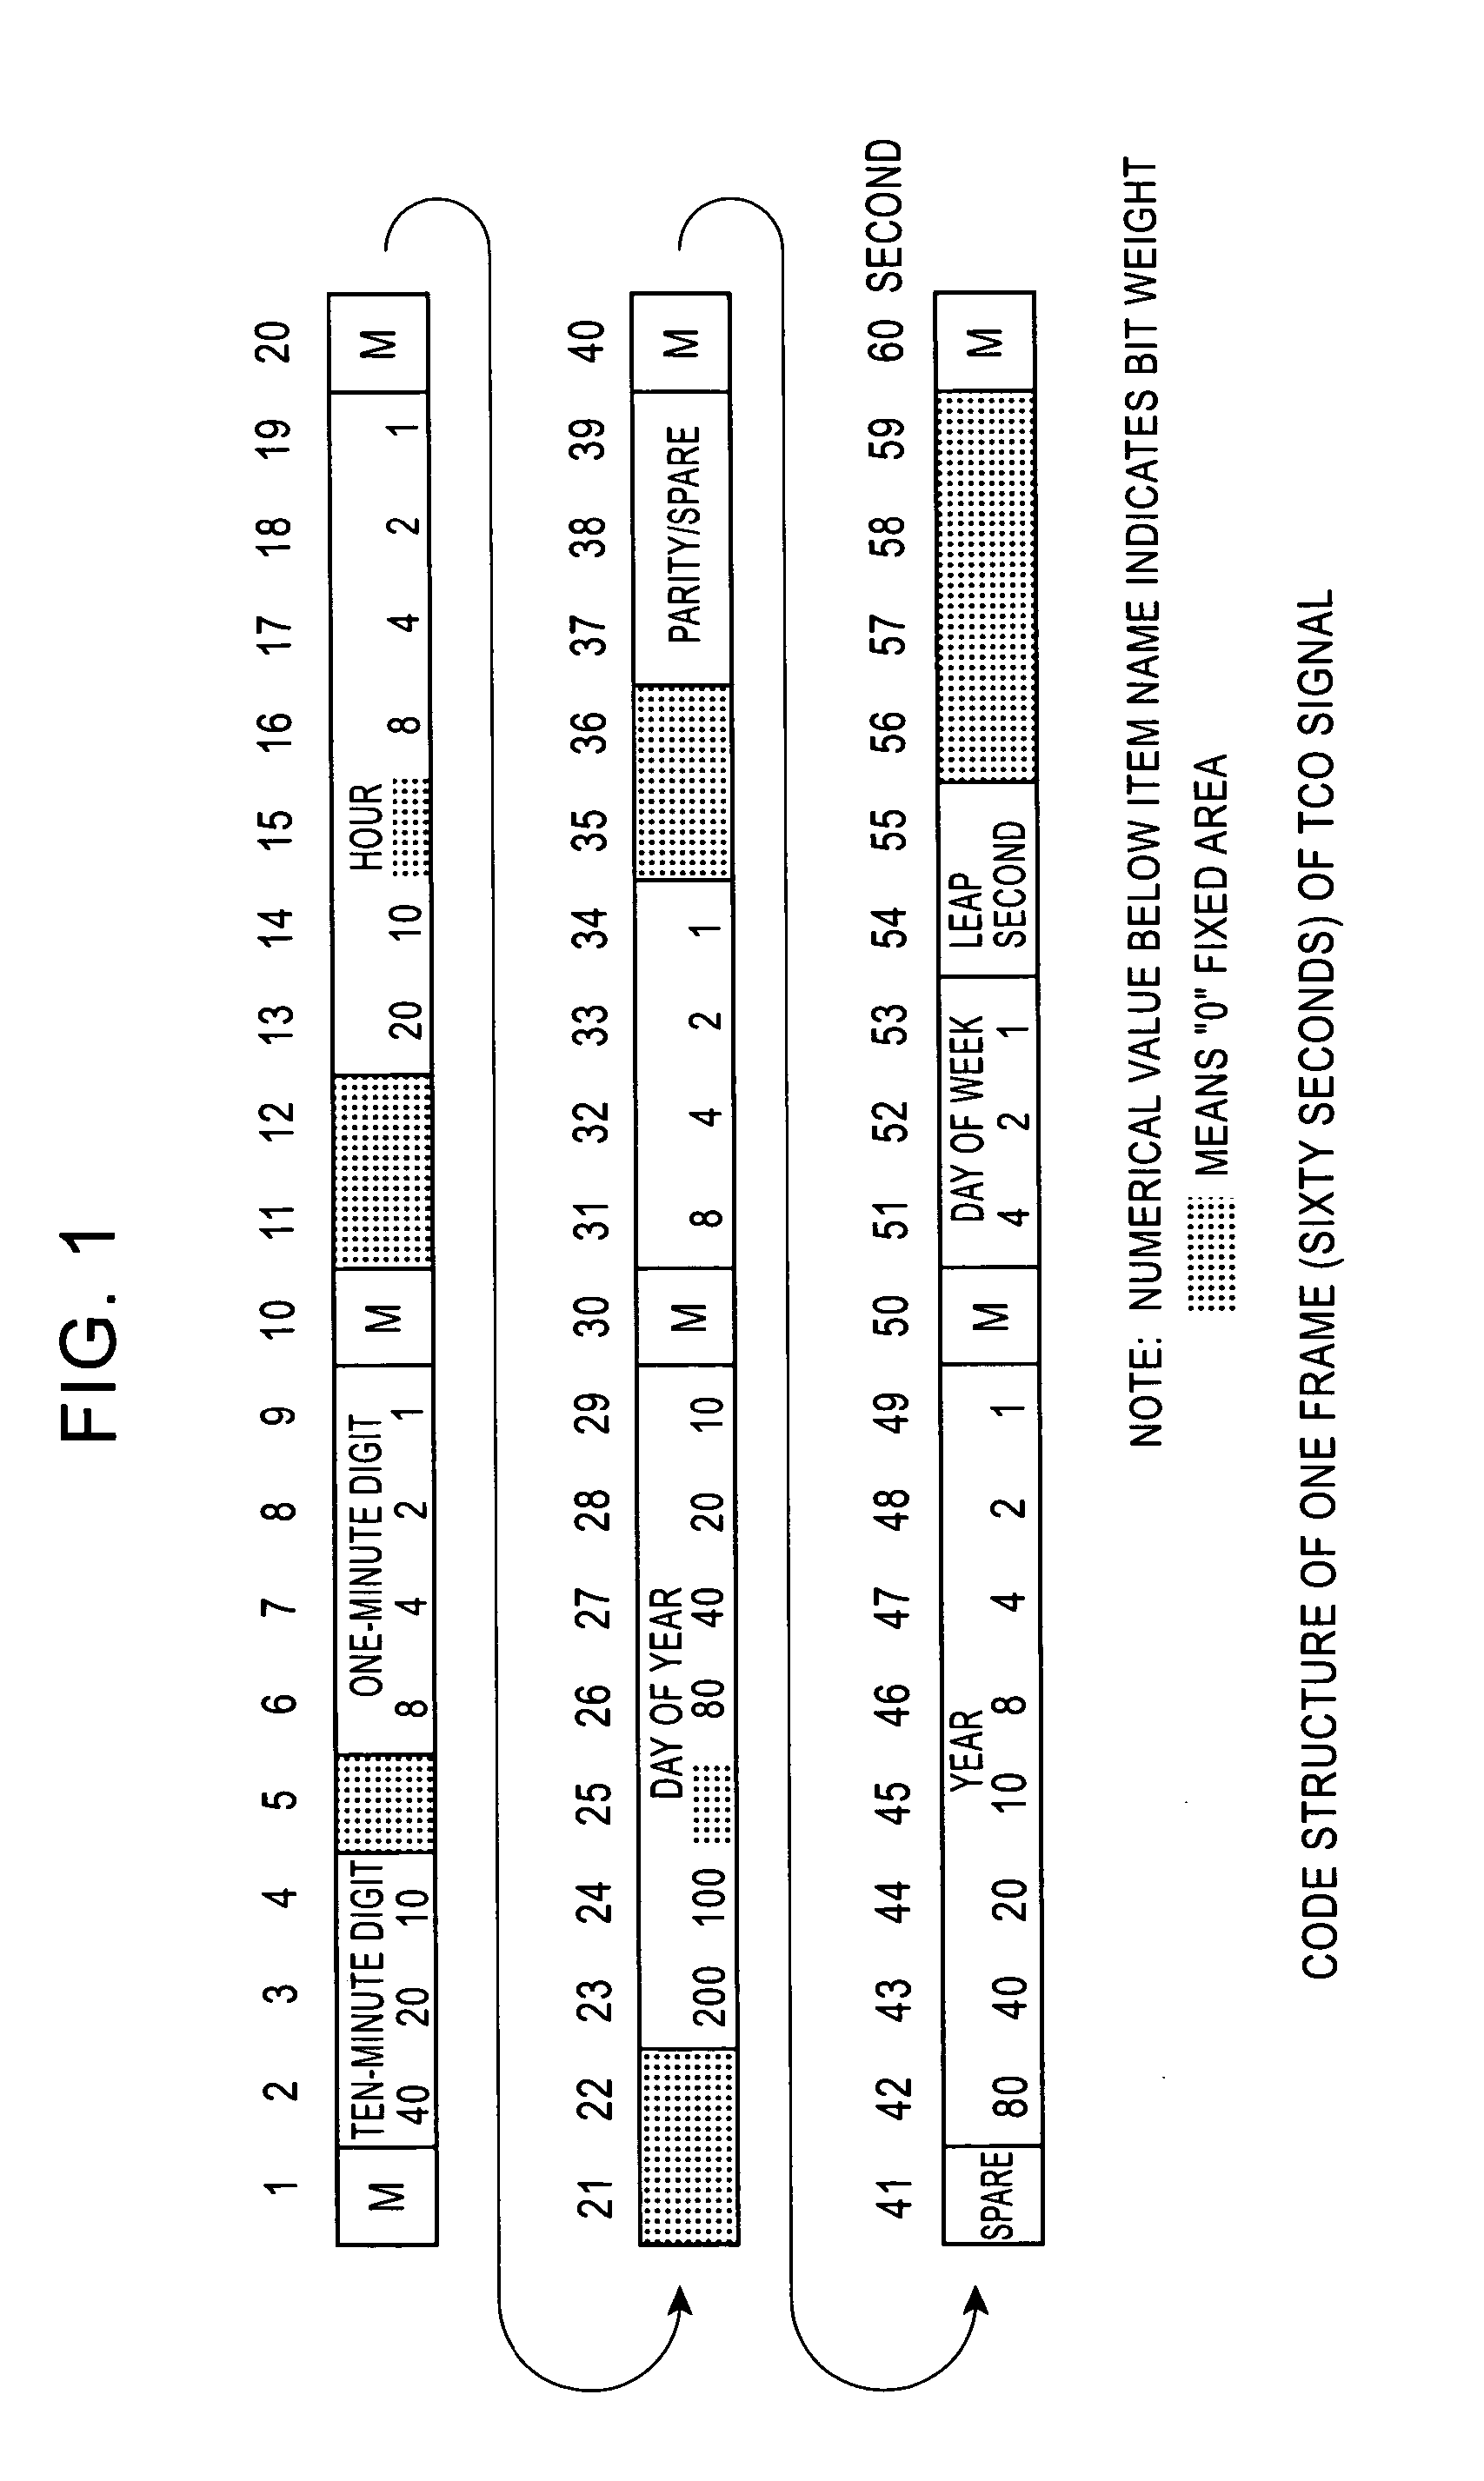 Standard wave receiver and time code decoding method